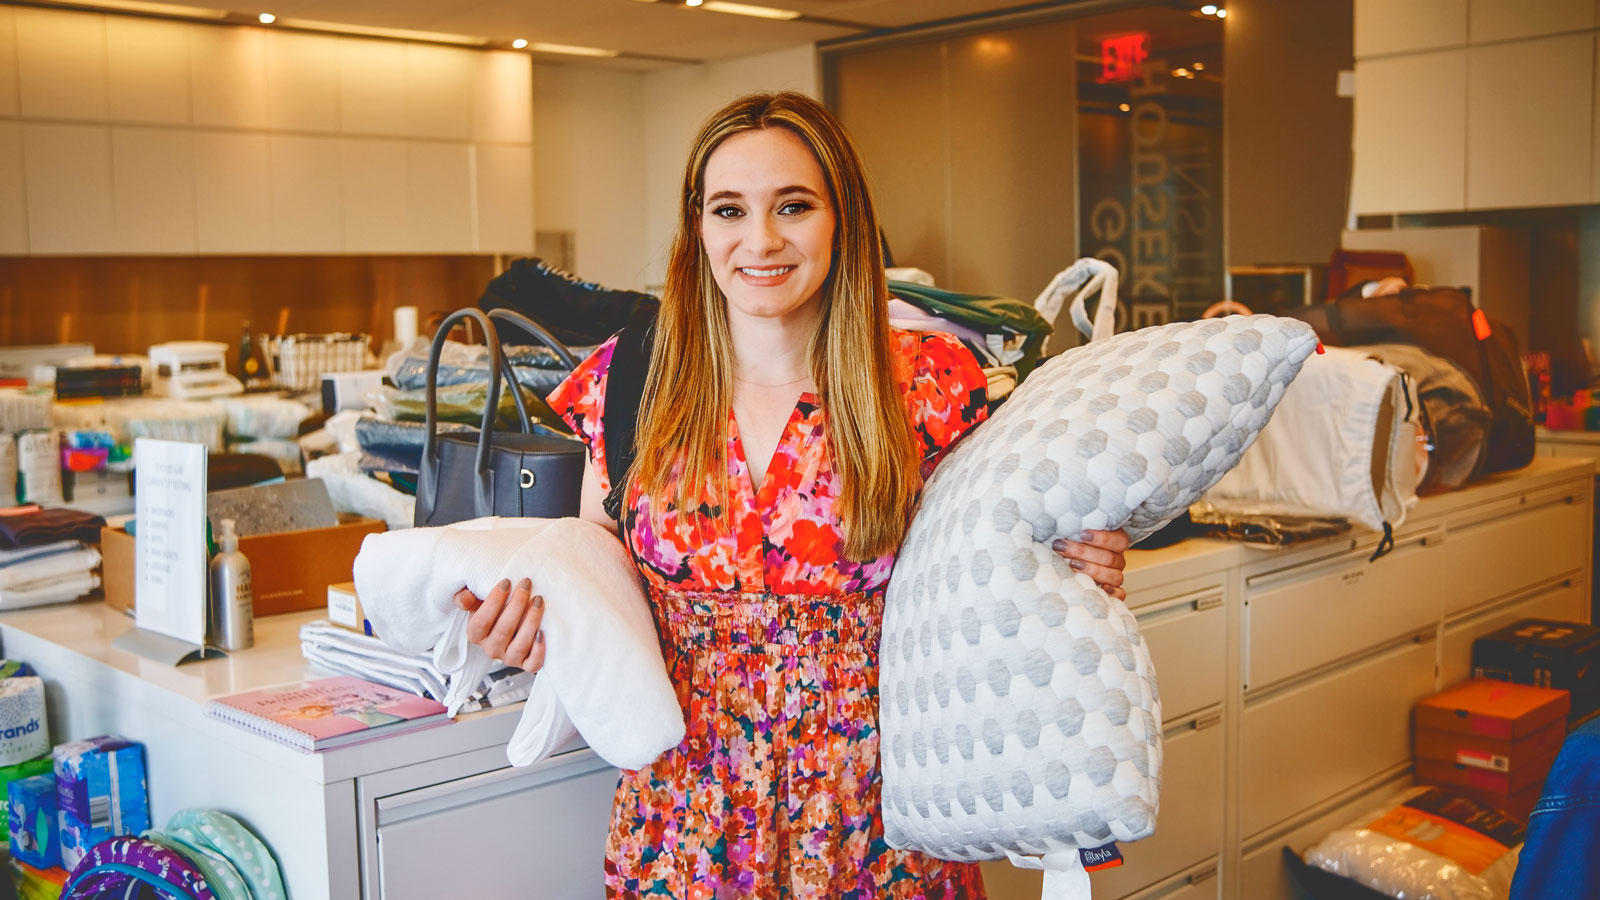 Leslie Sachs with sheets and a pillow at the Good Housekeeping Institute headquarters